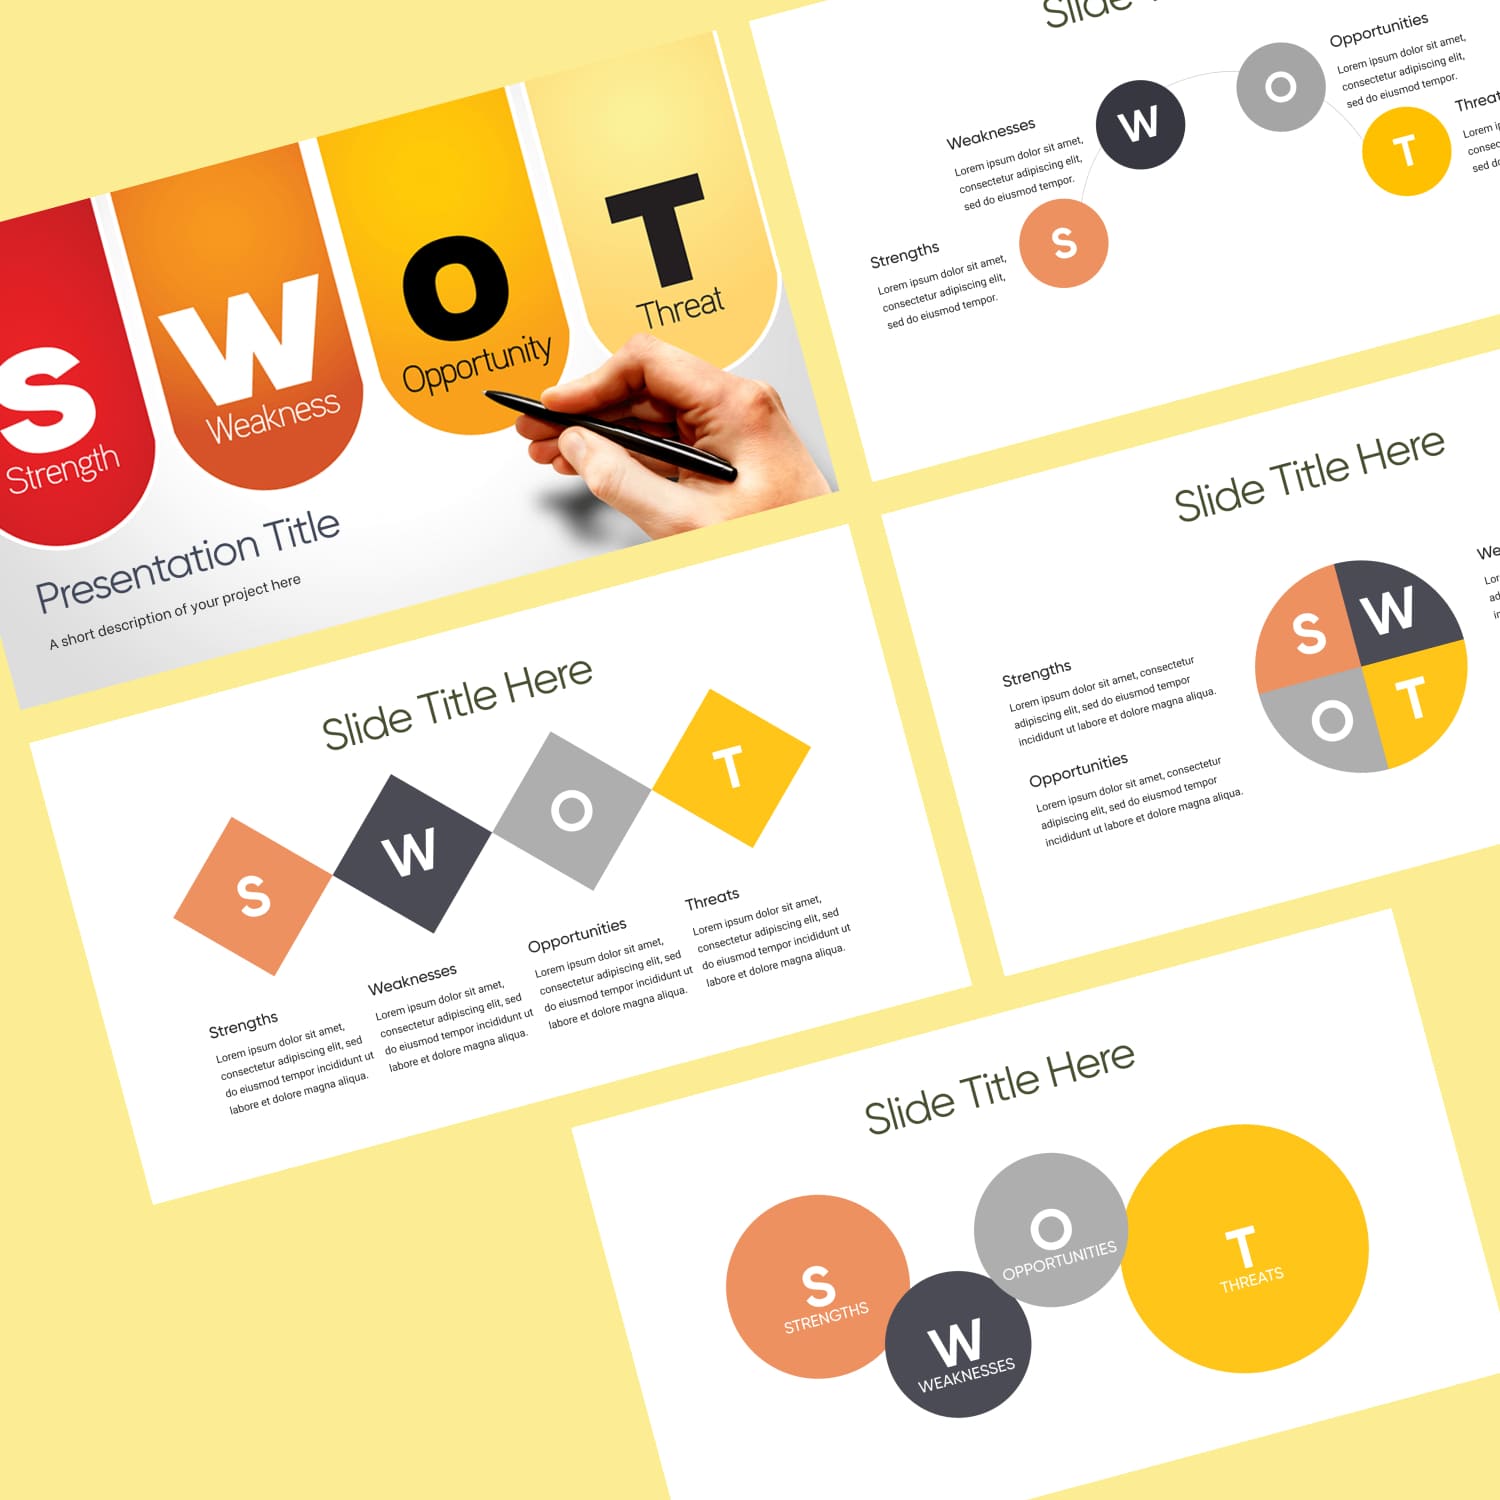 Preview SWOT Analysis Template Powerpoint.